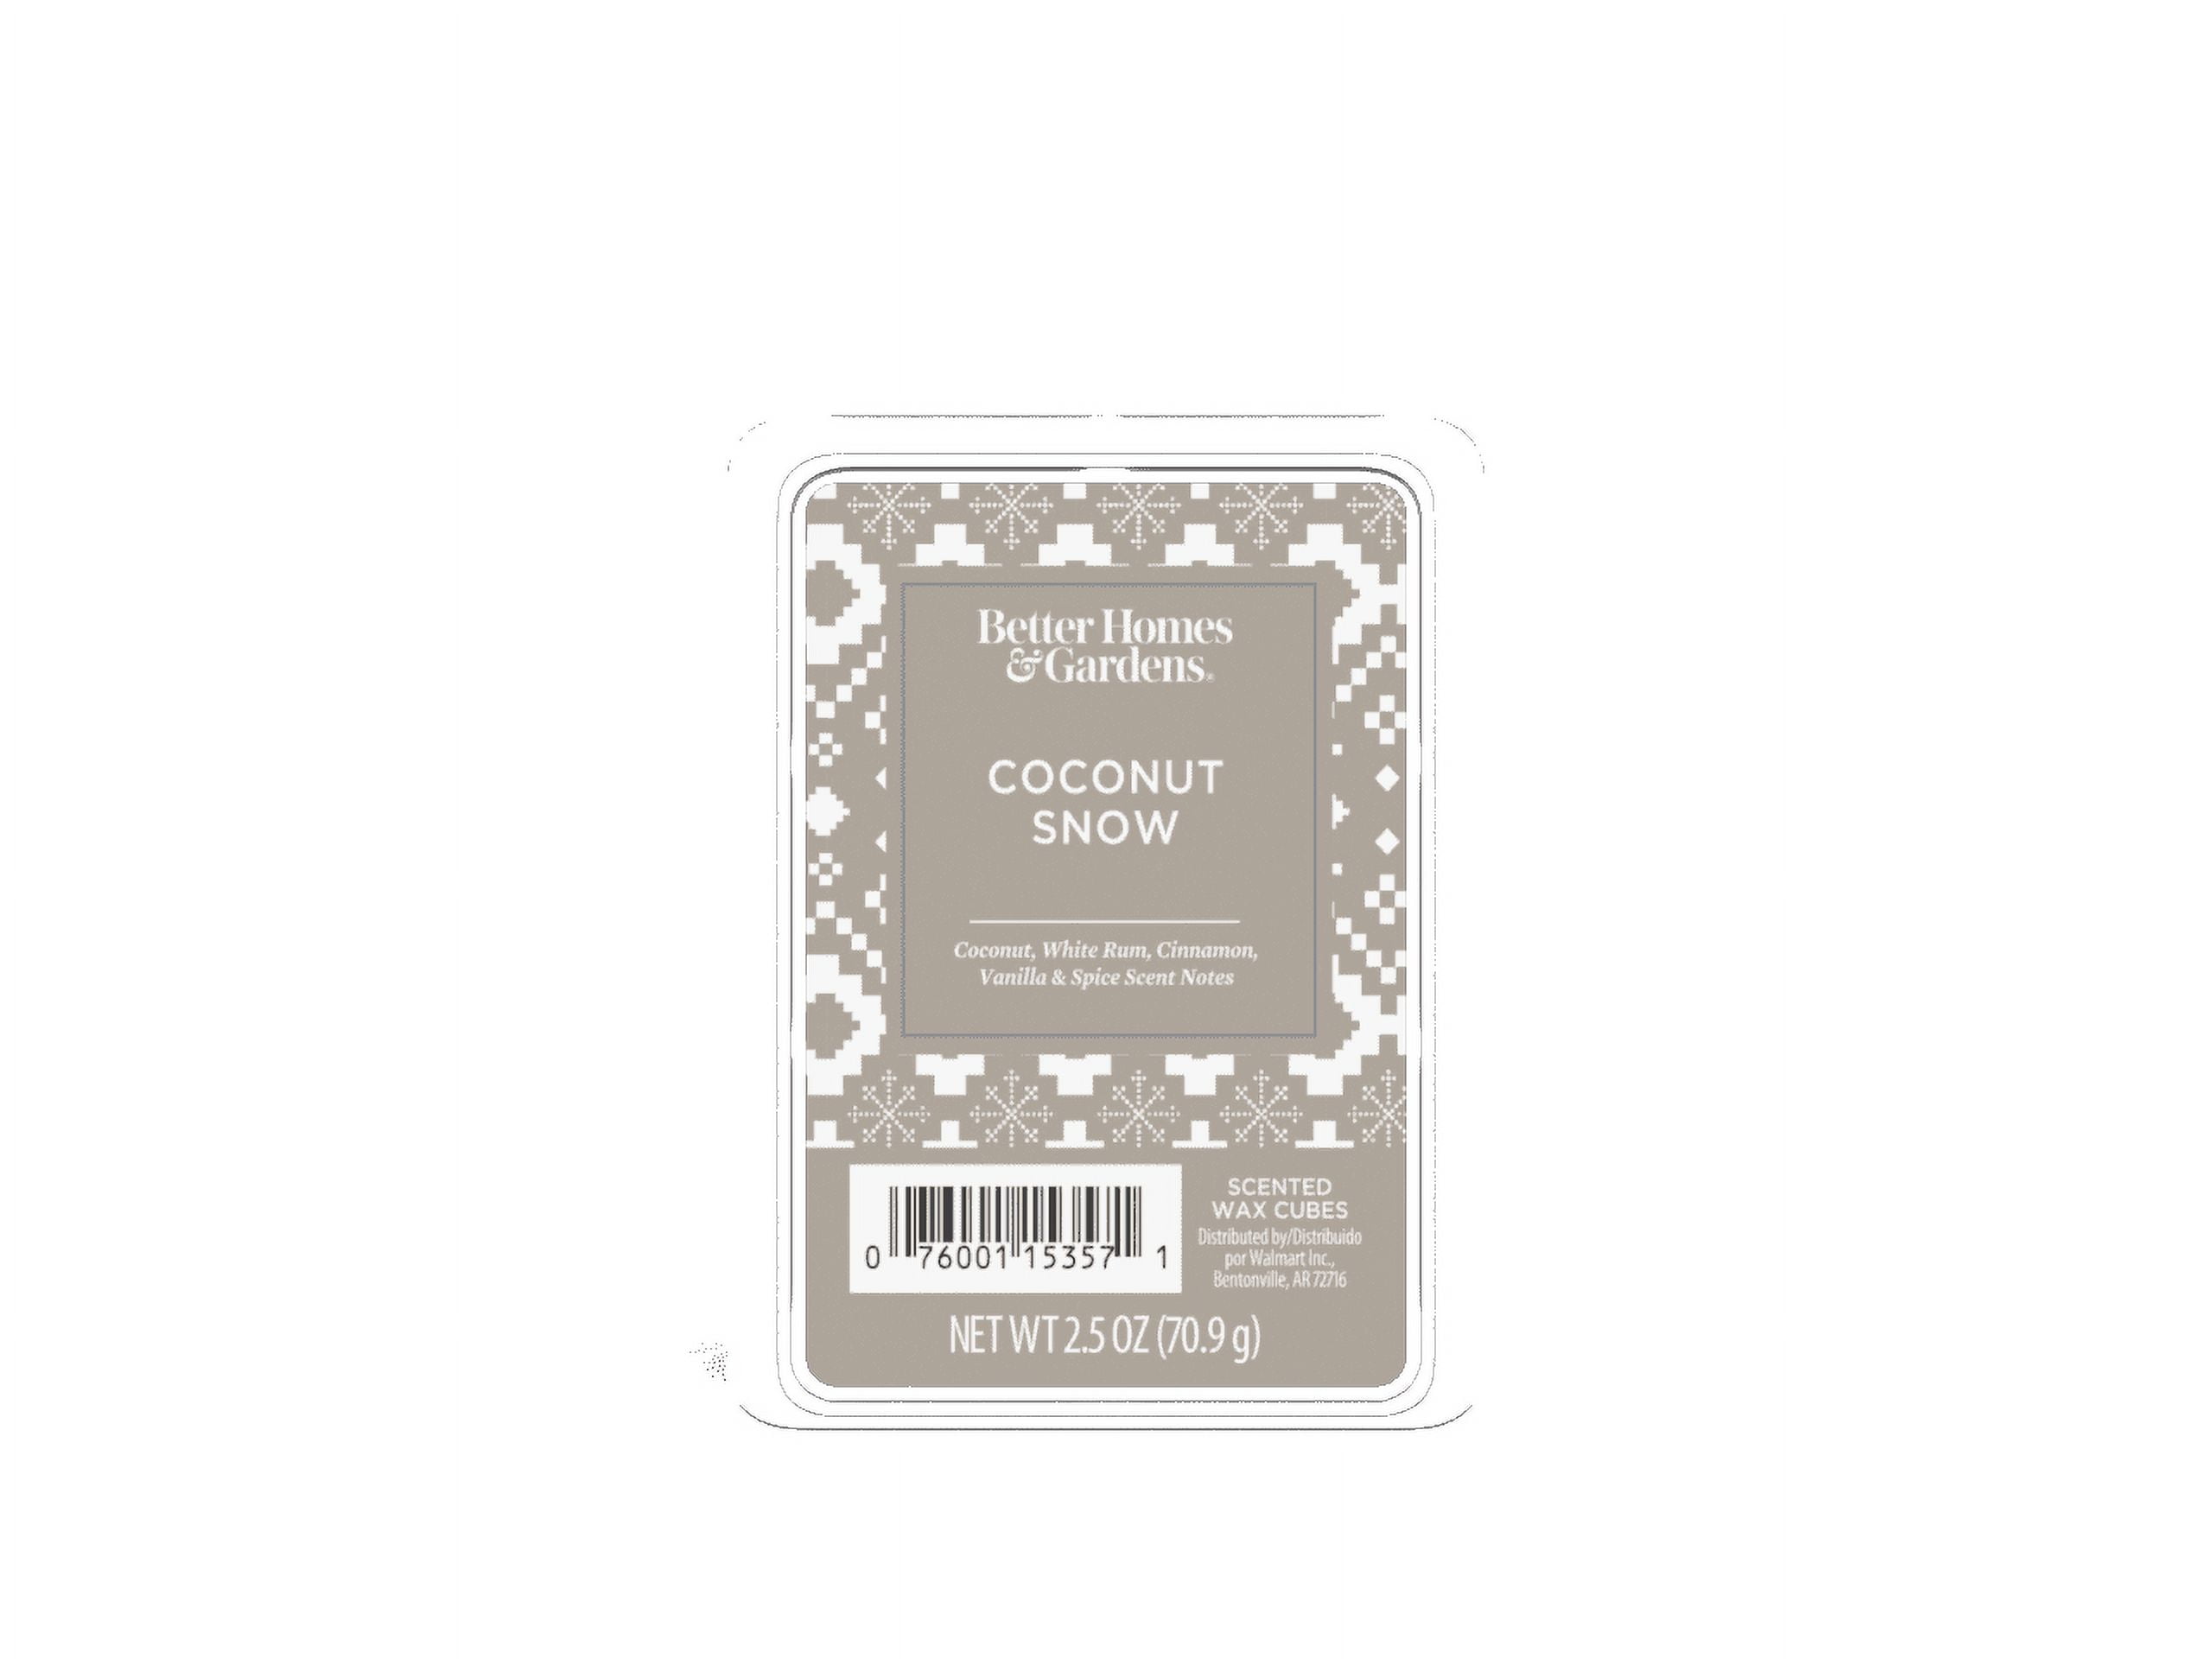 Island Coconut Creamsicle Scented Wax Melts, Better Homes & Gardens, 2.5 oz (5-Pack), Beige